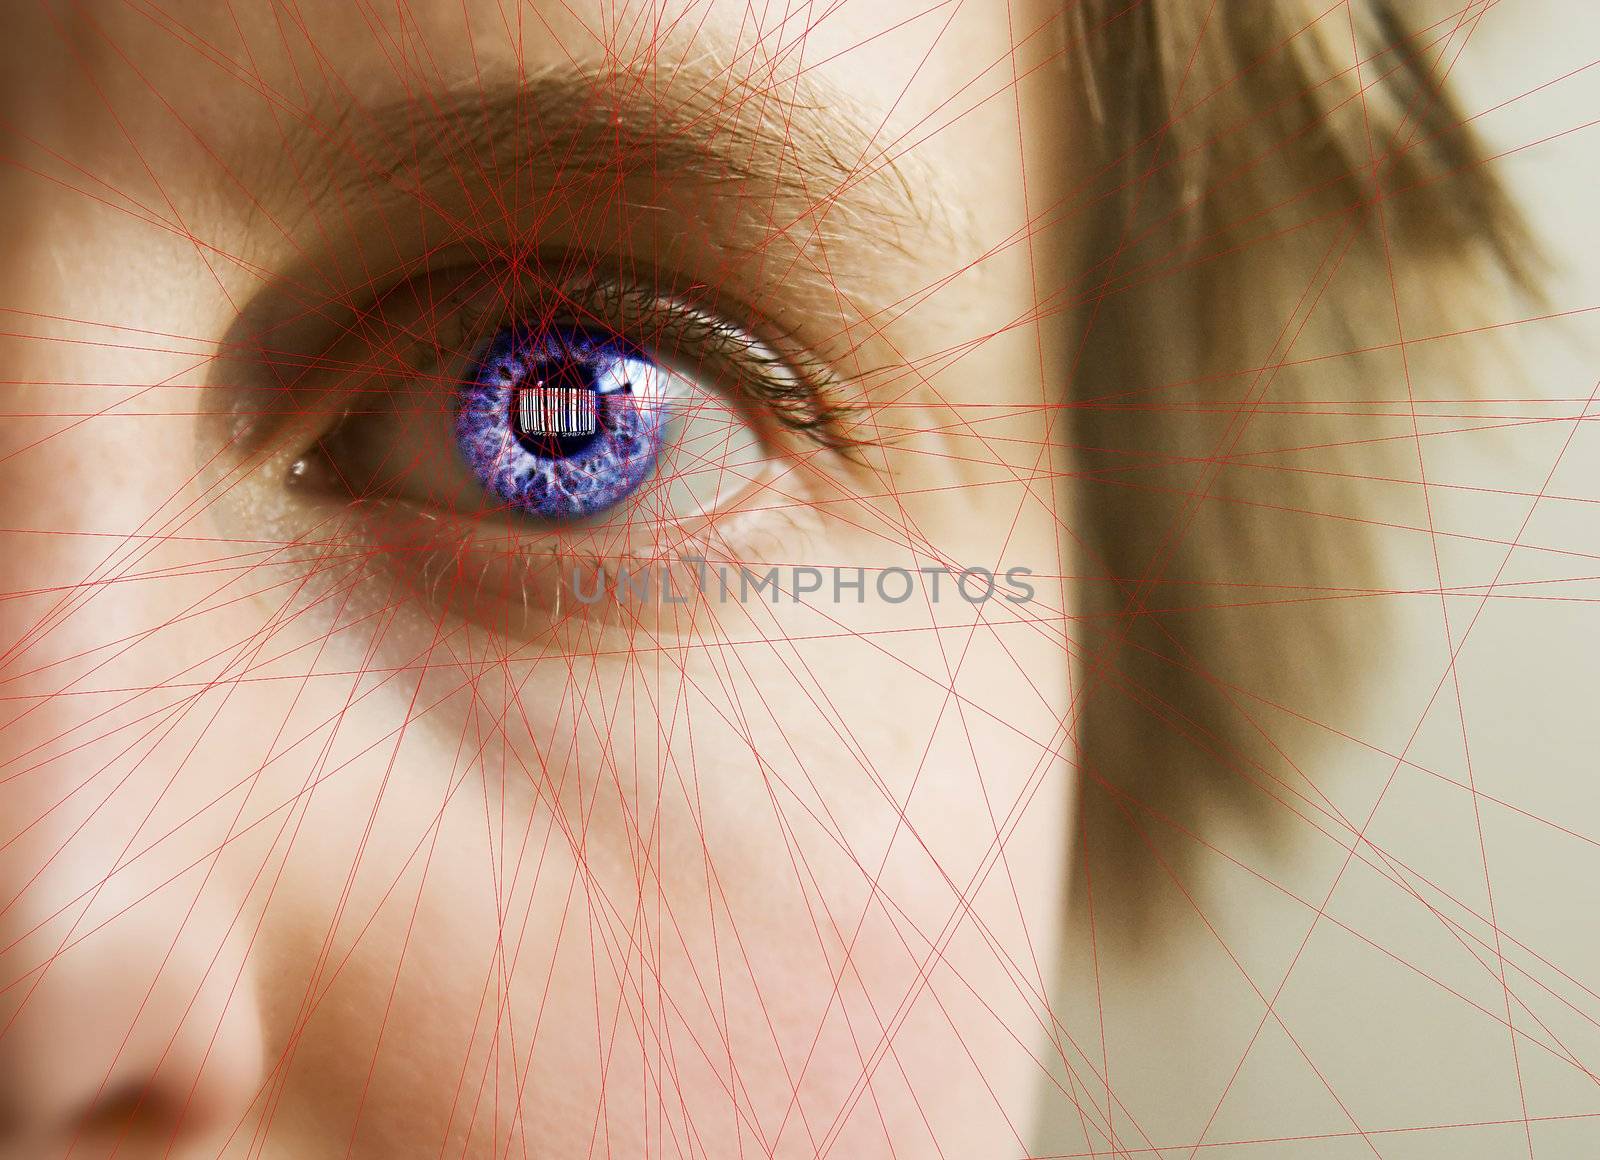 Red laser lines scanning the face and retina of a woman.  The iris is overlayed with a bar code.  Security, big brother, privacy concept image.